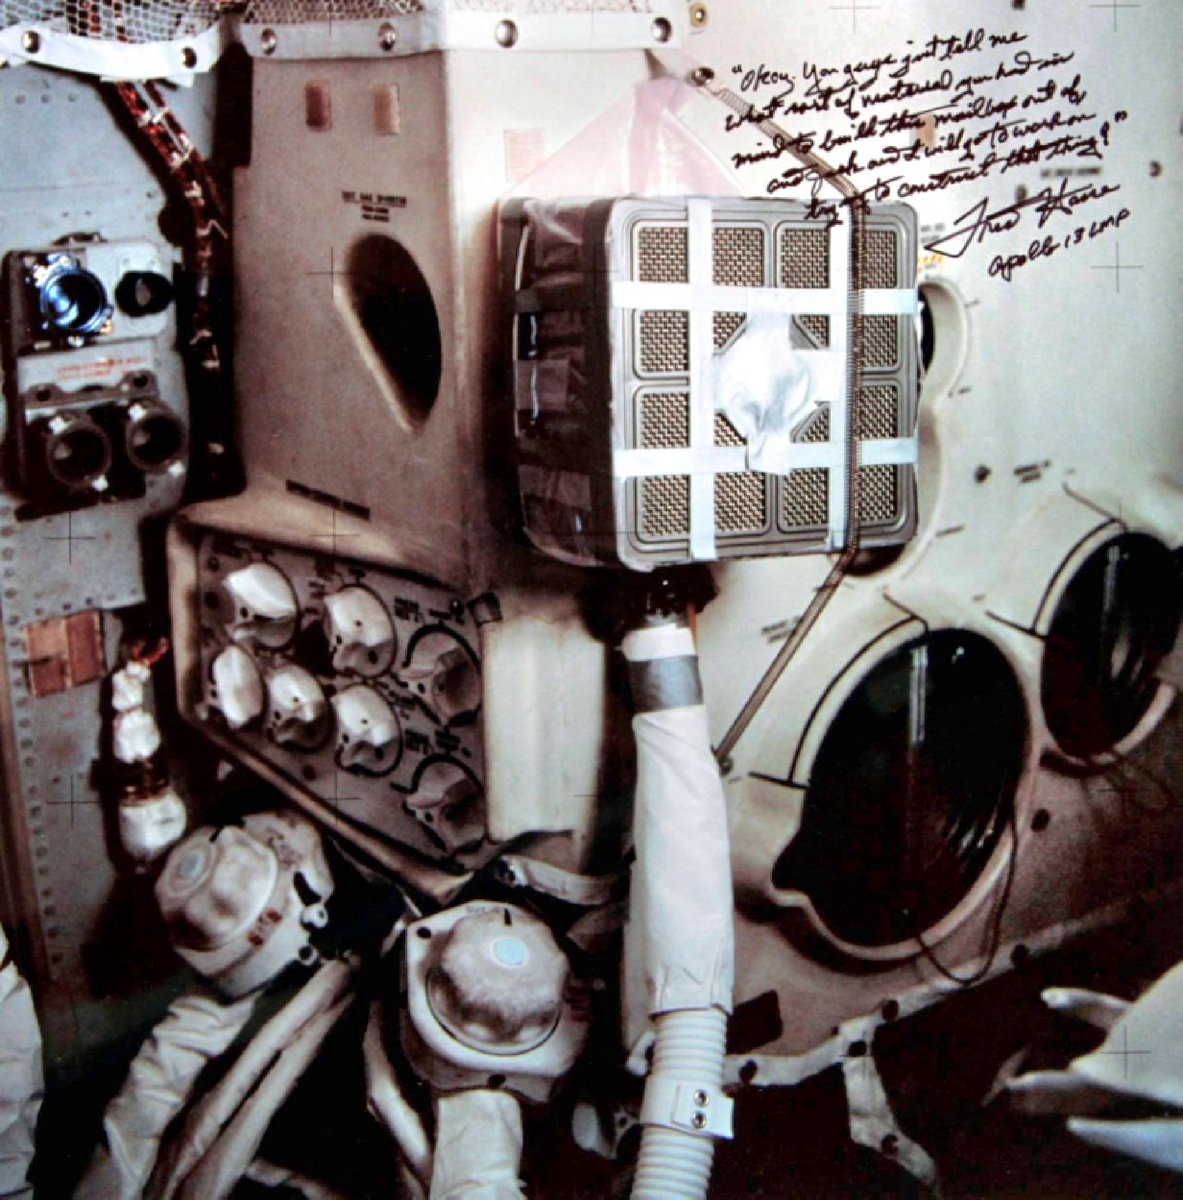 The world’s most famous carbon dioxide absorber! 'Okay. You guys just tell me what sort of material you had in mind to build this mailbox out of and Jack and I will go to work on trying to construct that thing.' #Apollo13 April 14, 1970 contactlight.de